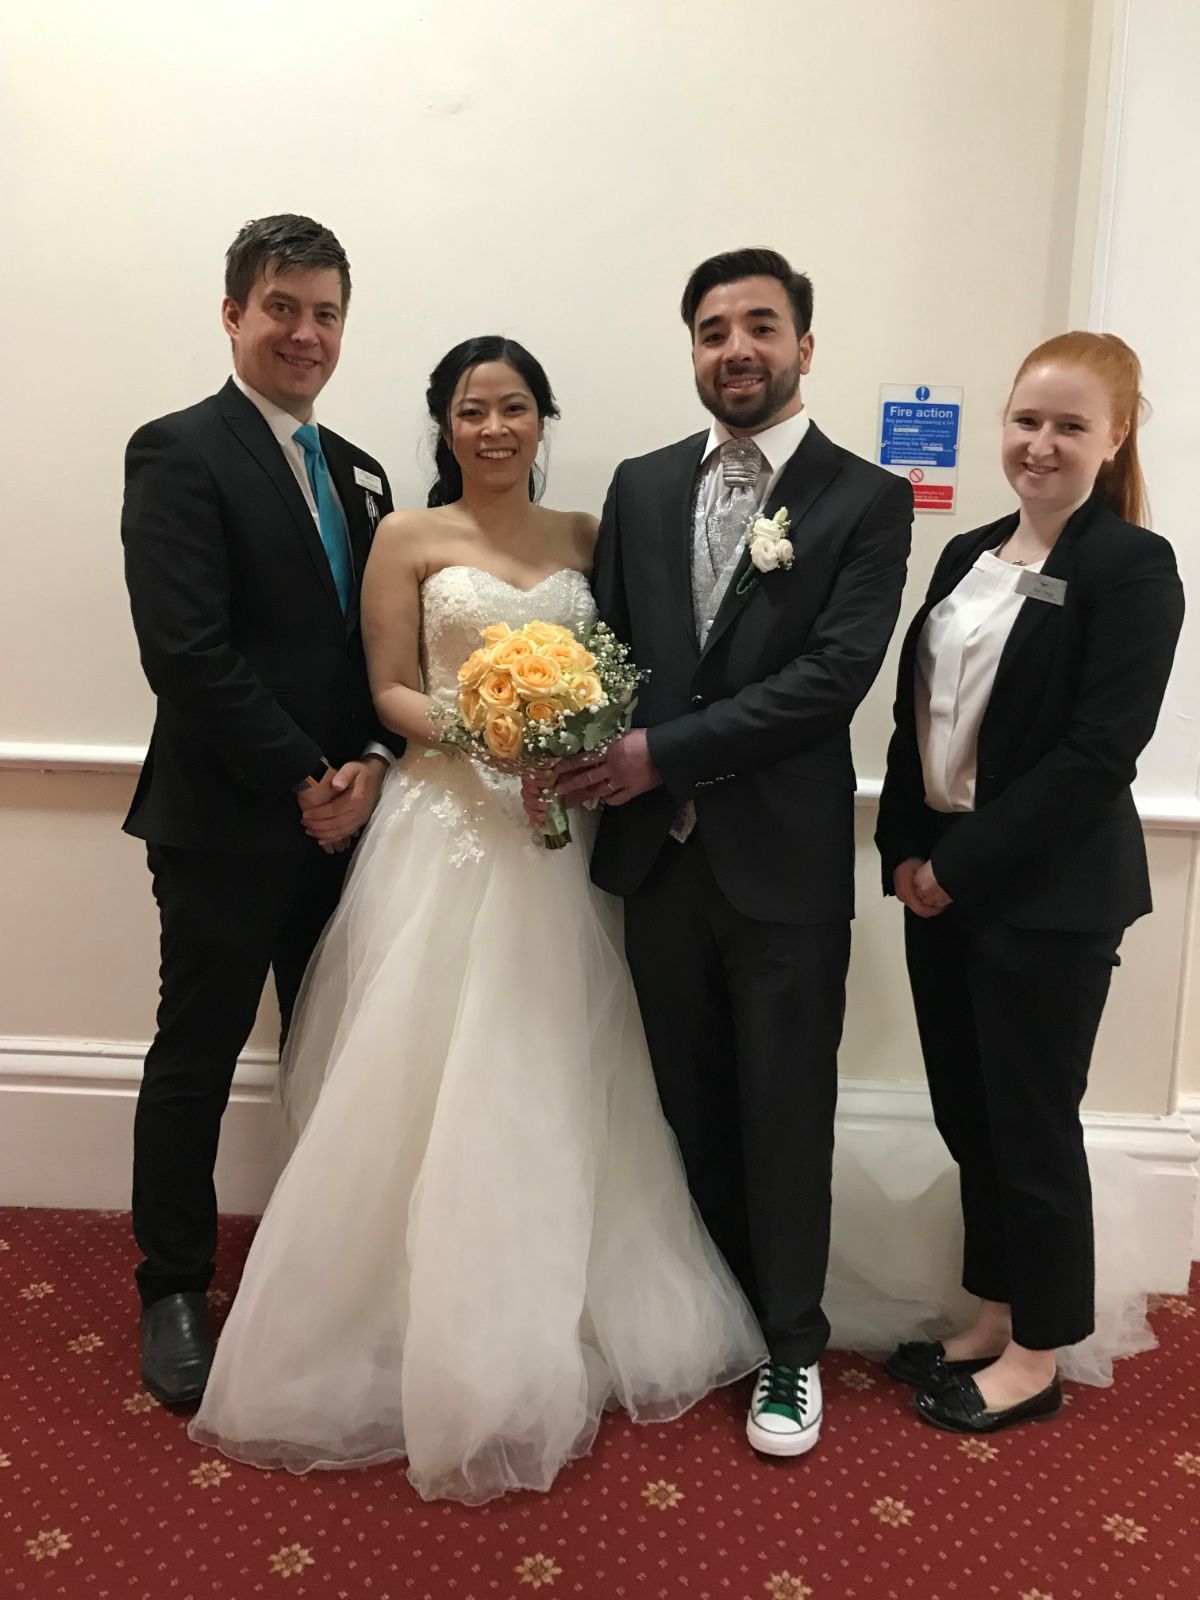 Conference & banqueting manager Andy, with the bride & groom and Kat the wedding coordinator 